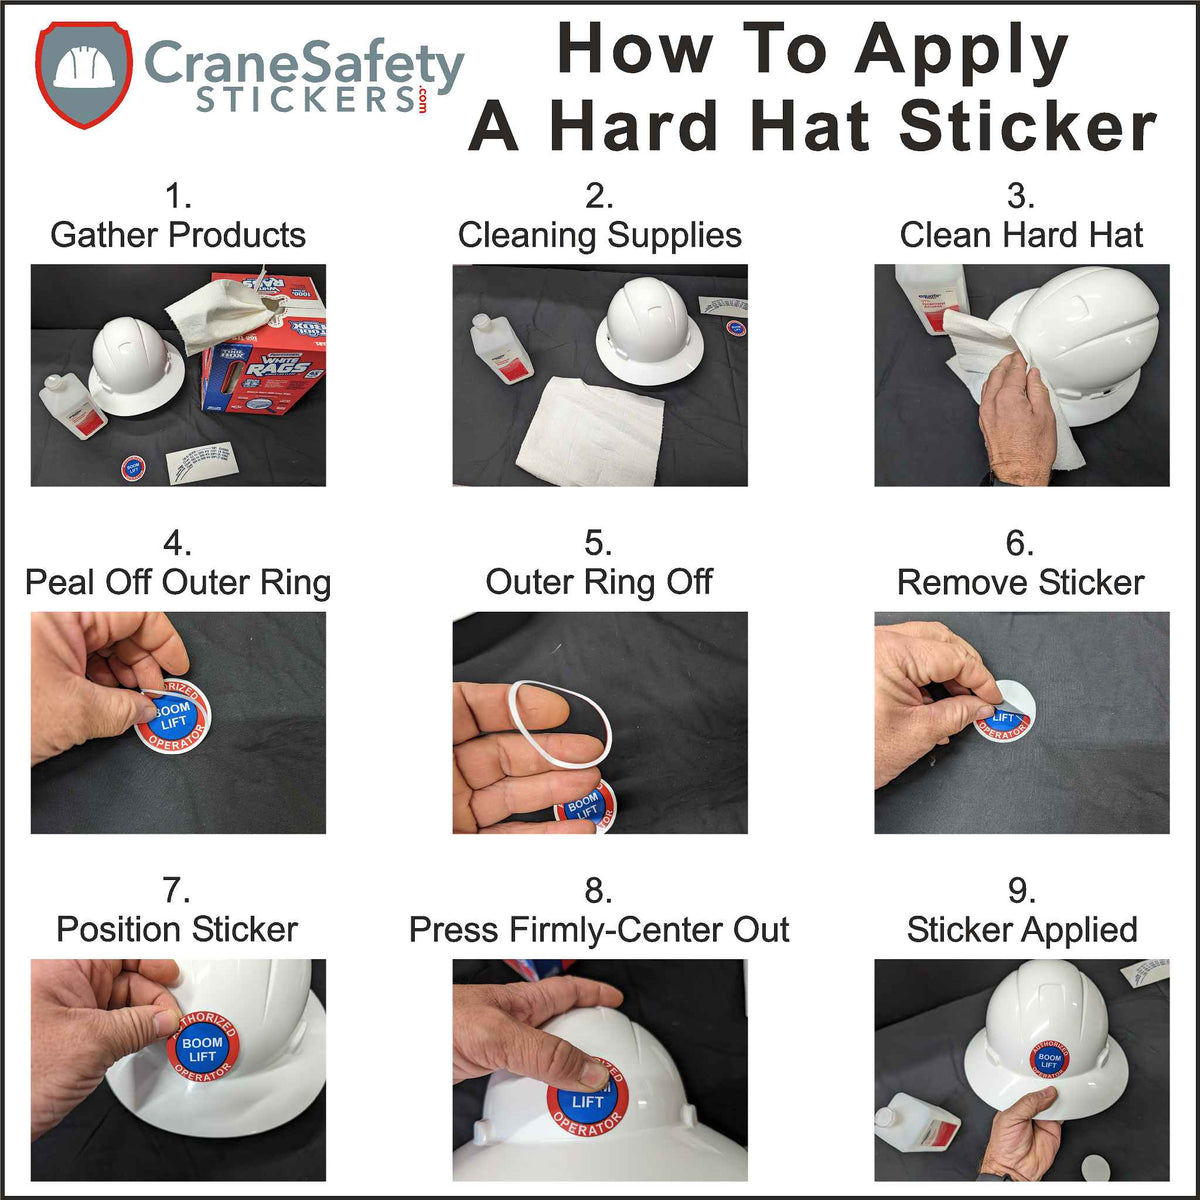 directions on how to apply our safe worker hard hat sticker to a hard hat.